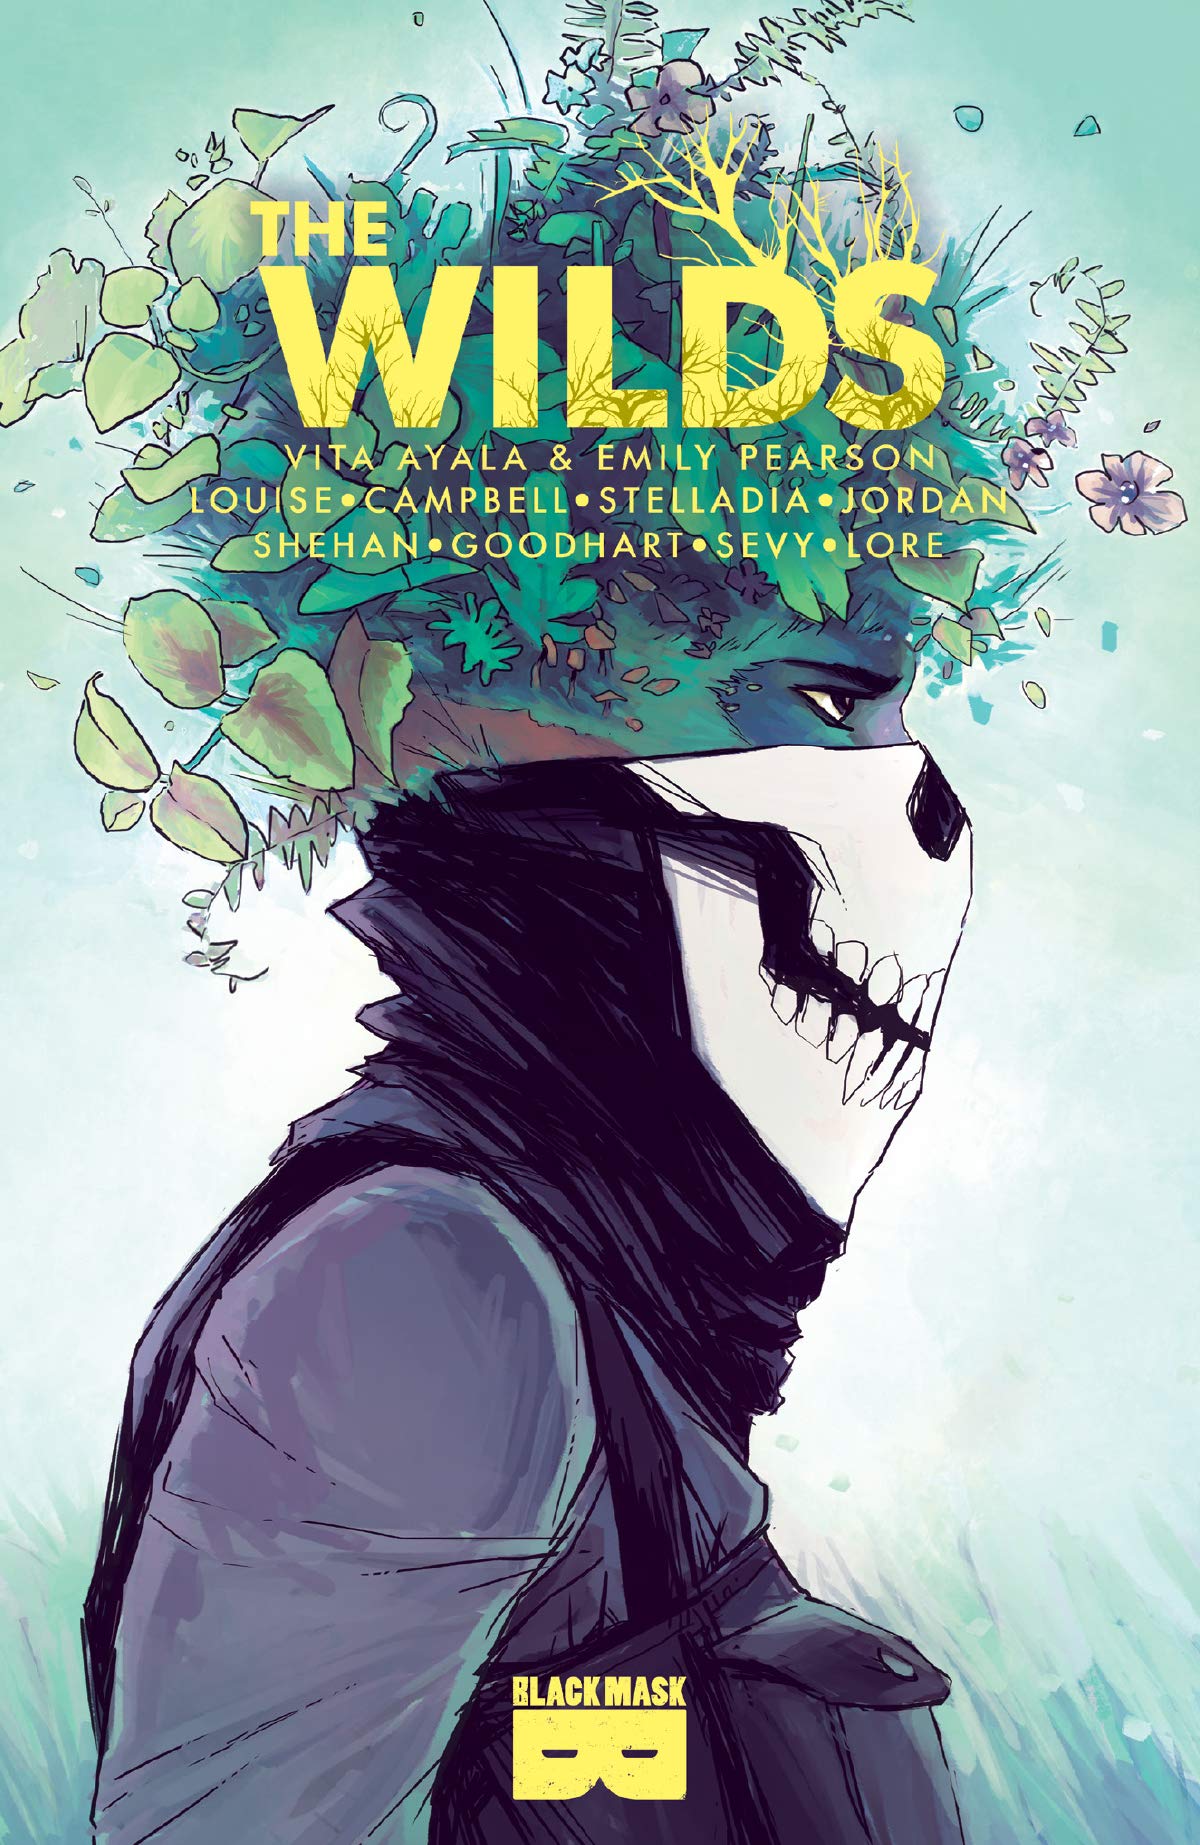 The 100 Best Comics of the Decade: The Wilds